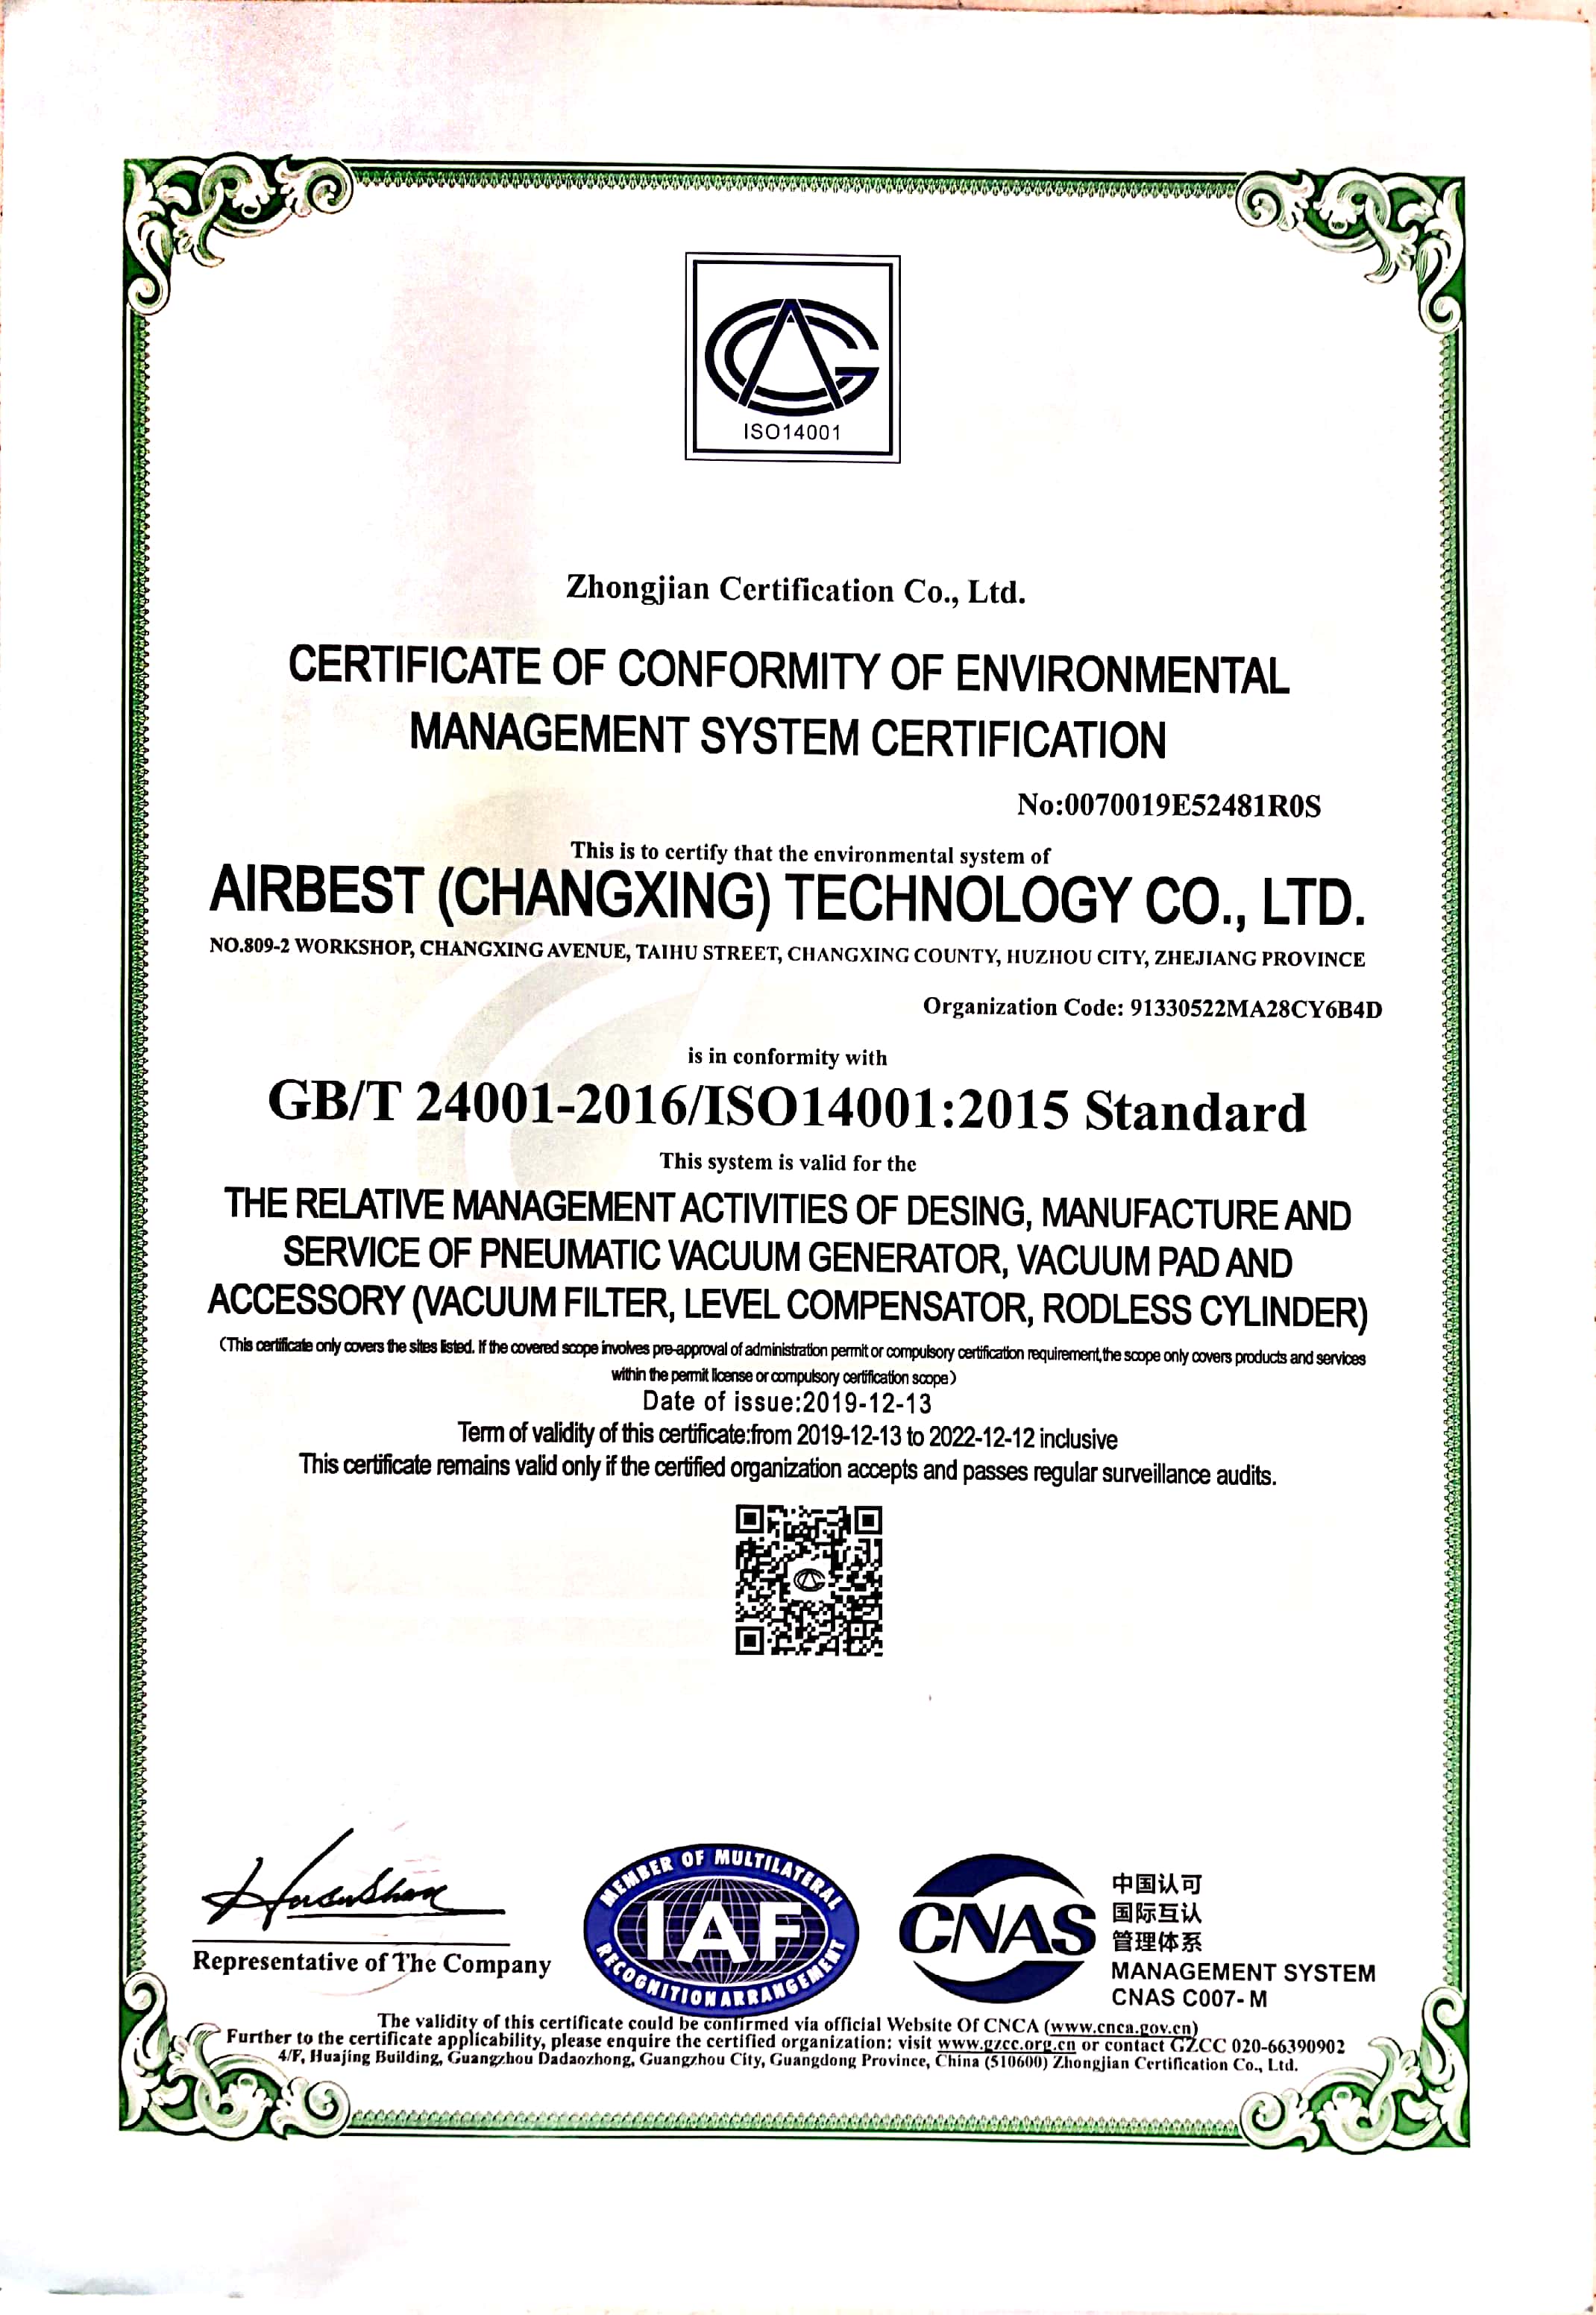 Renew audition of certificate of conformity of environmental management system certification_copy20221213_copy20230114